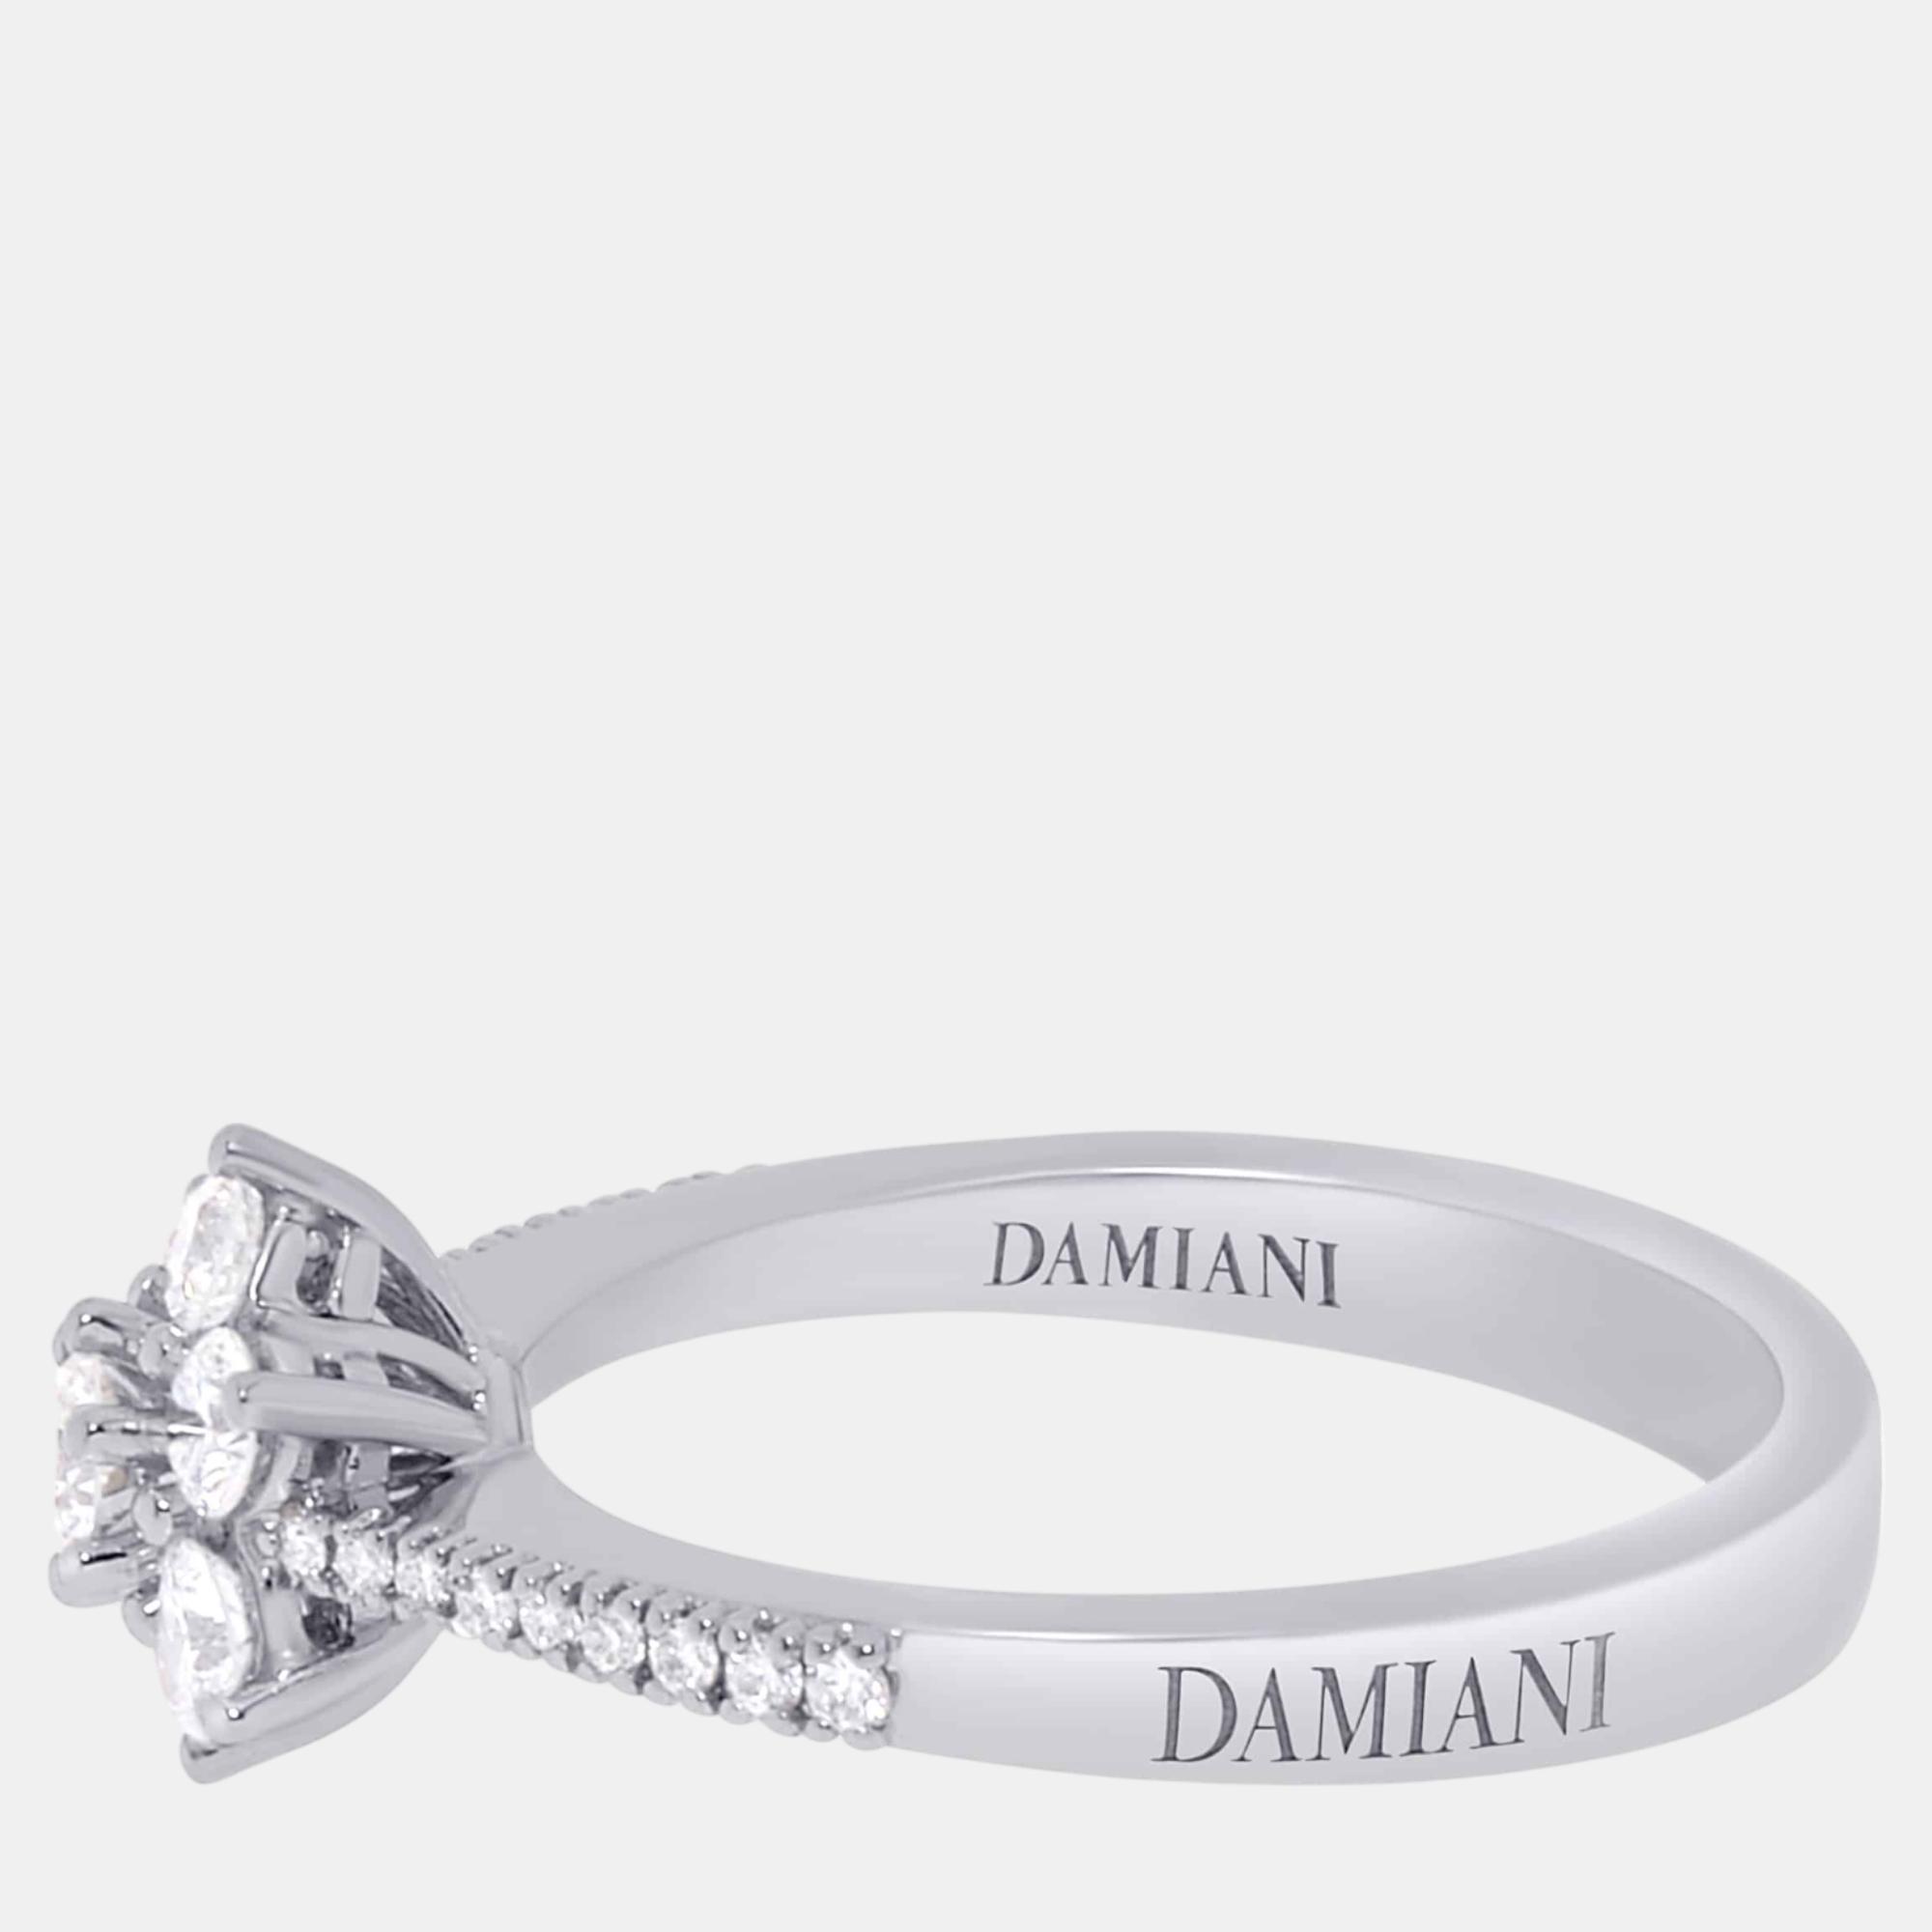 Pre-owned Damiani 18k White Gold Diamond 0.64ct. Tw. Cluster Ring Sz. 6.25